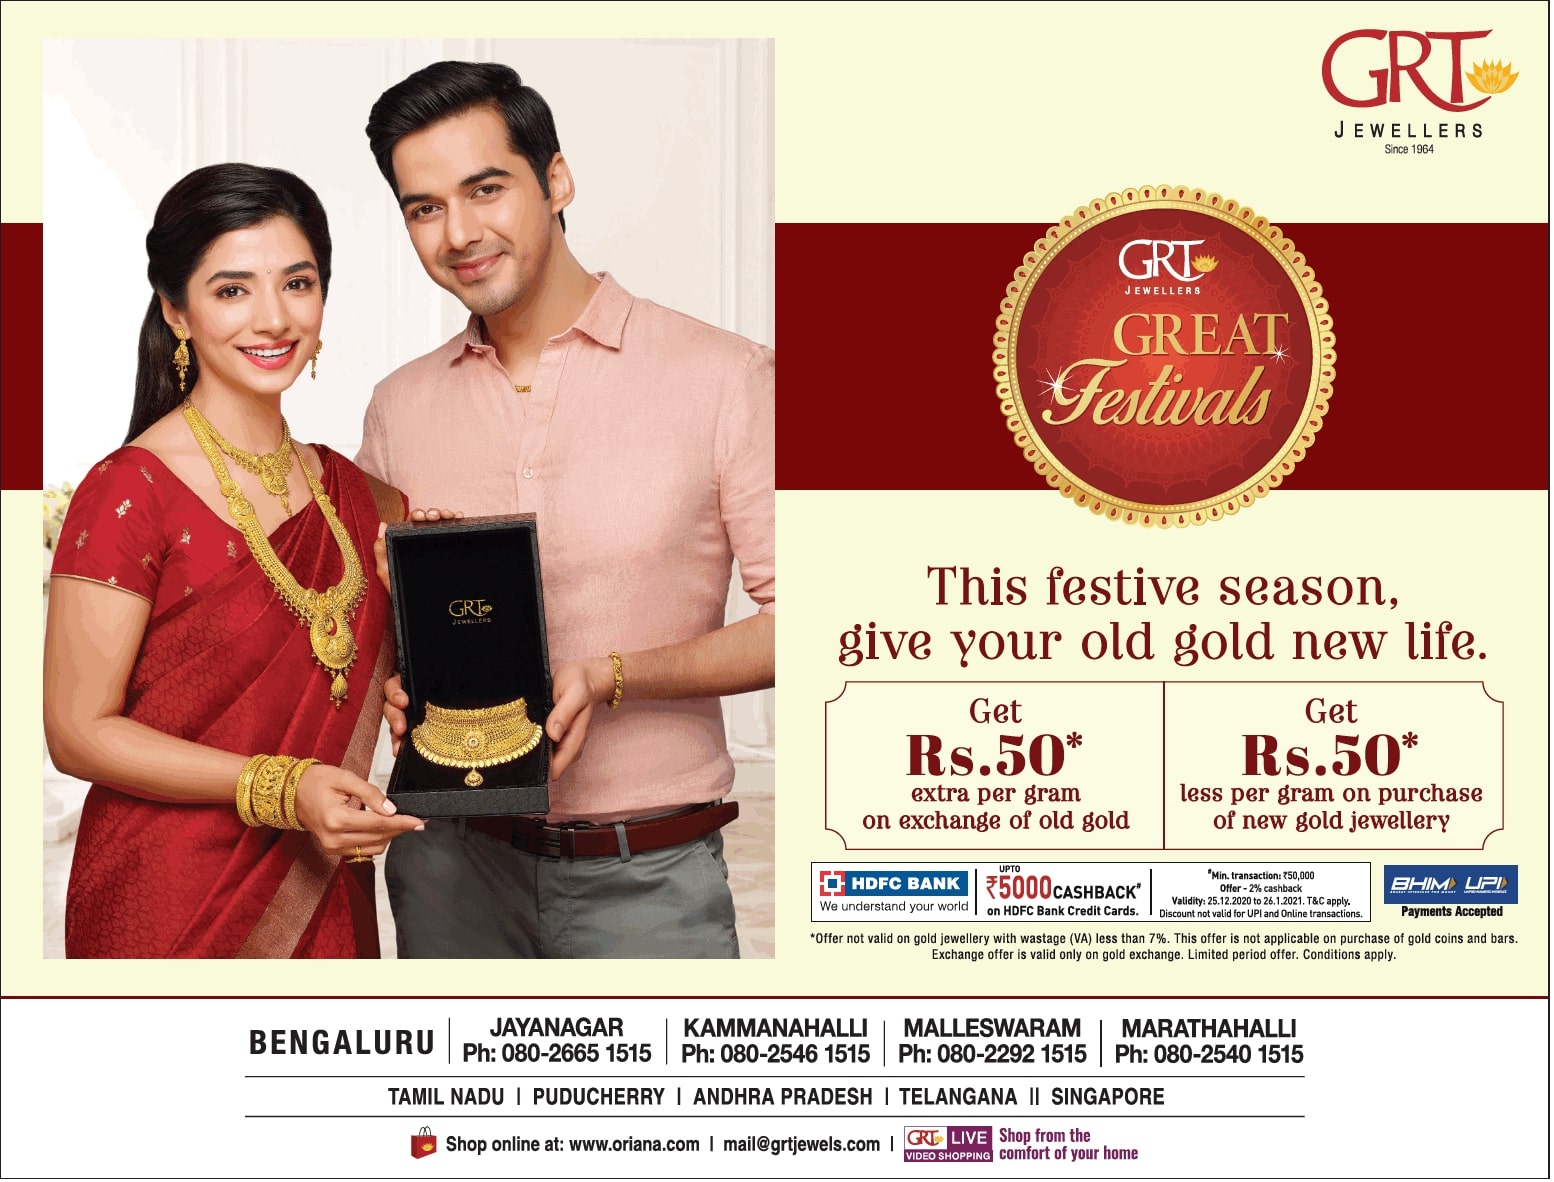 grt-jewellers-this-festive-season-give-your-old-gold-newe-life-ad-bangalore-times-06-01-2021